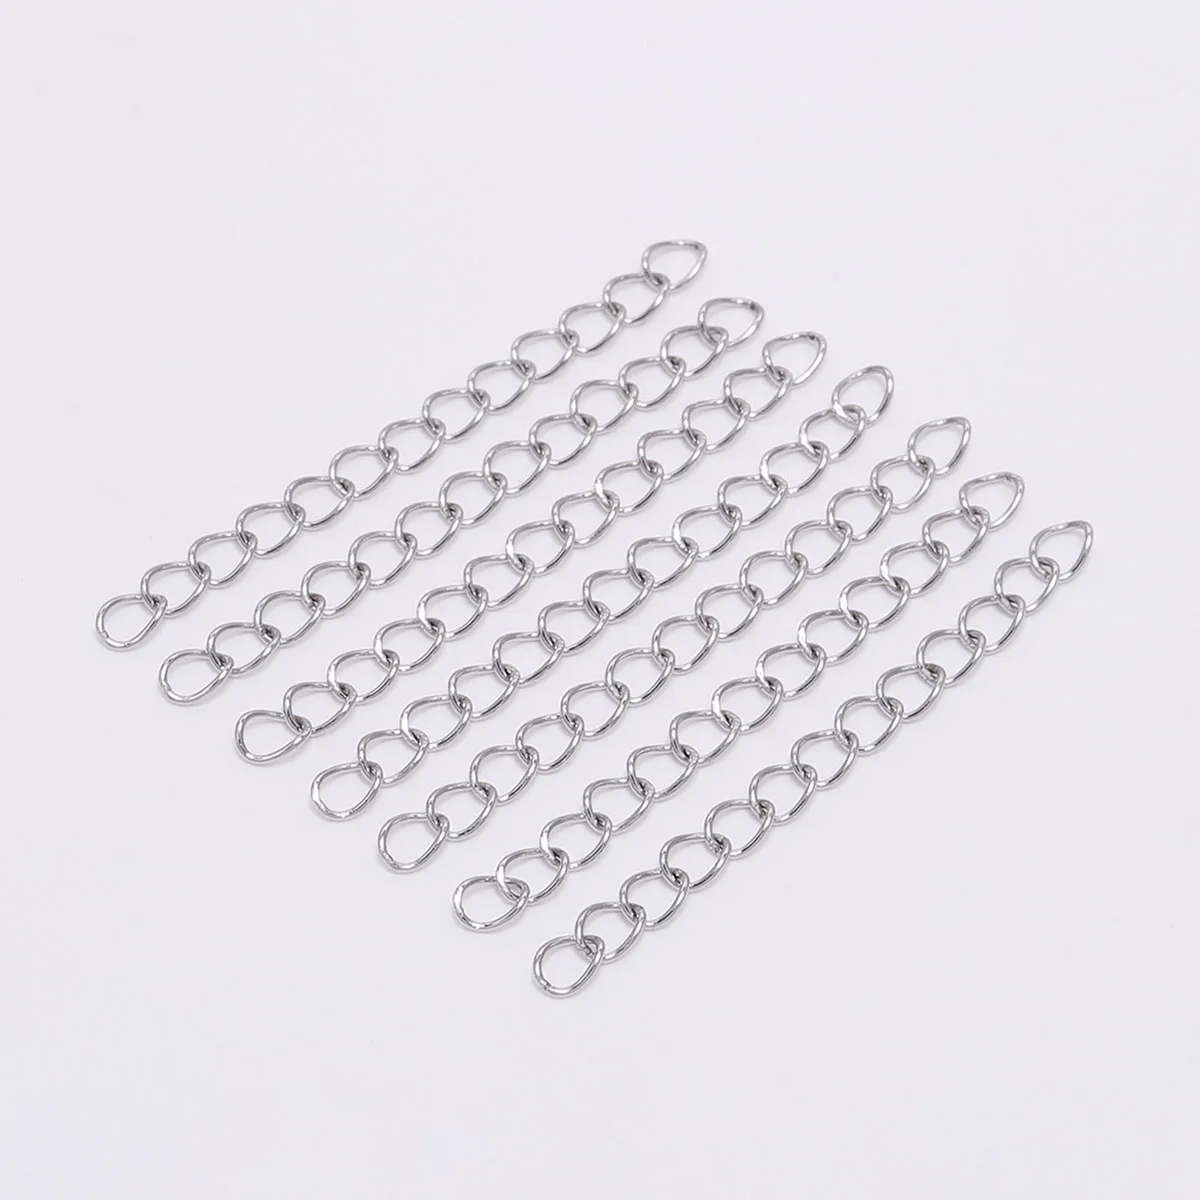 

50Pcs/lot 5 7cm Stainless steel Bulk Necklace Extension Chain Tail Extender For Jewelry Making Supplies Bracelet Chains Findings